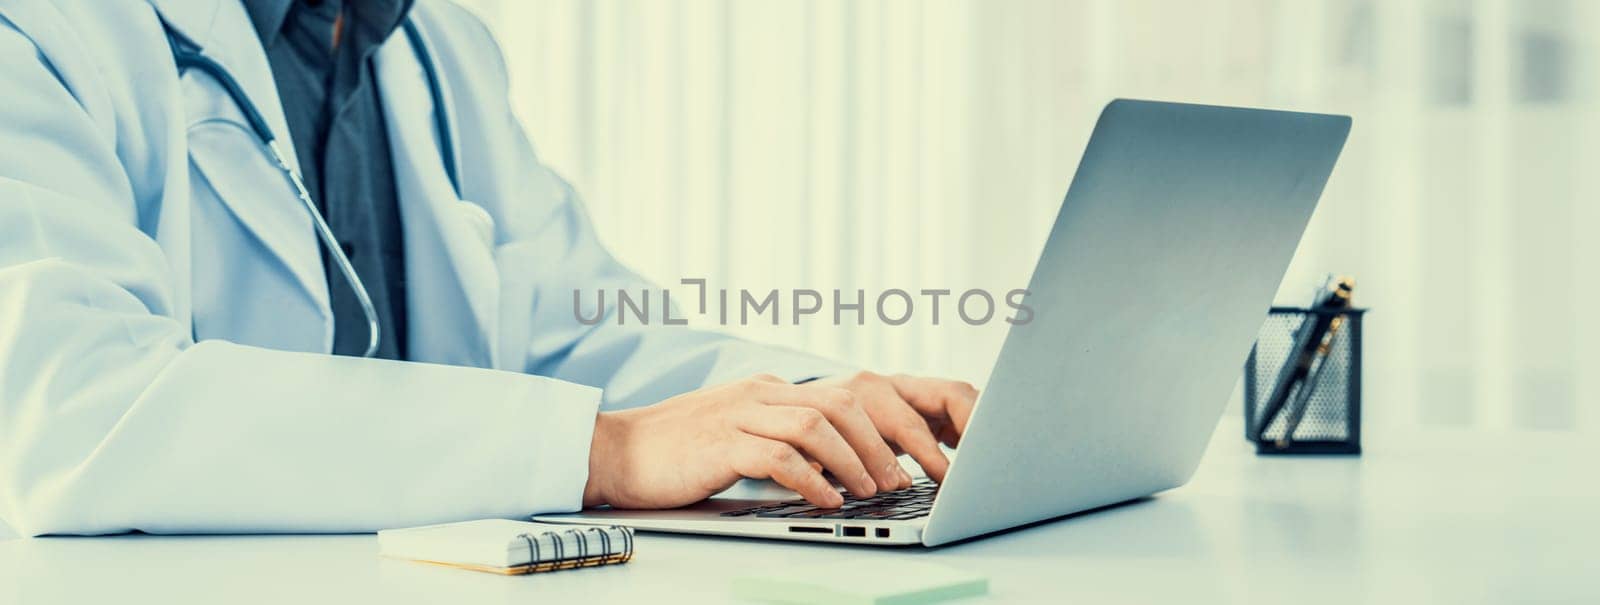 Doctor at hospital sit at his desk working on laptop diagnosing patient test results, developing treatment plan for illnesses and sicknesses. Medical staff and healthcare service. Panorama Rigid